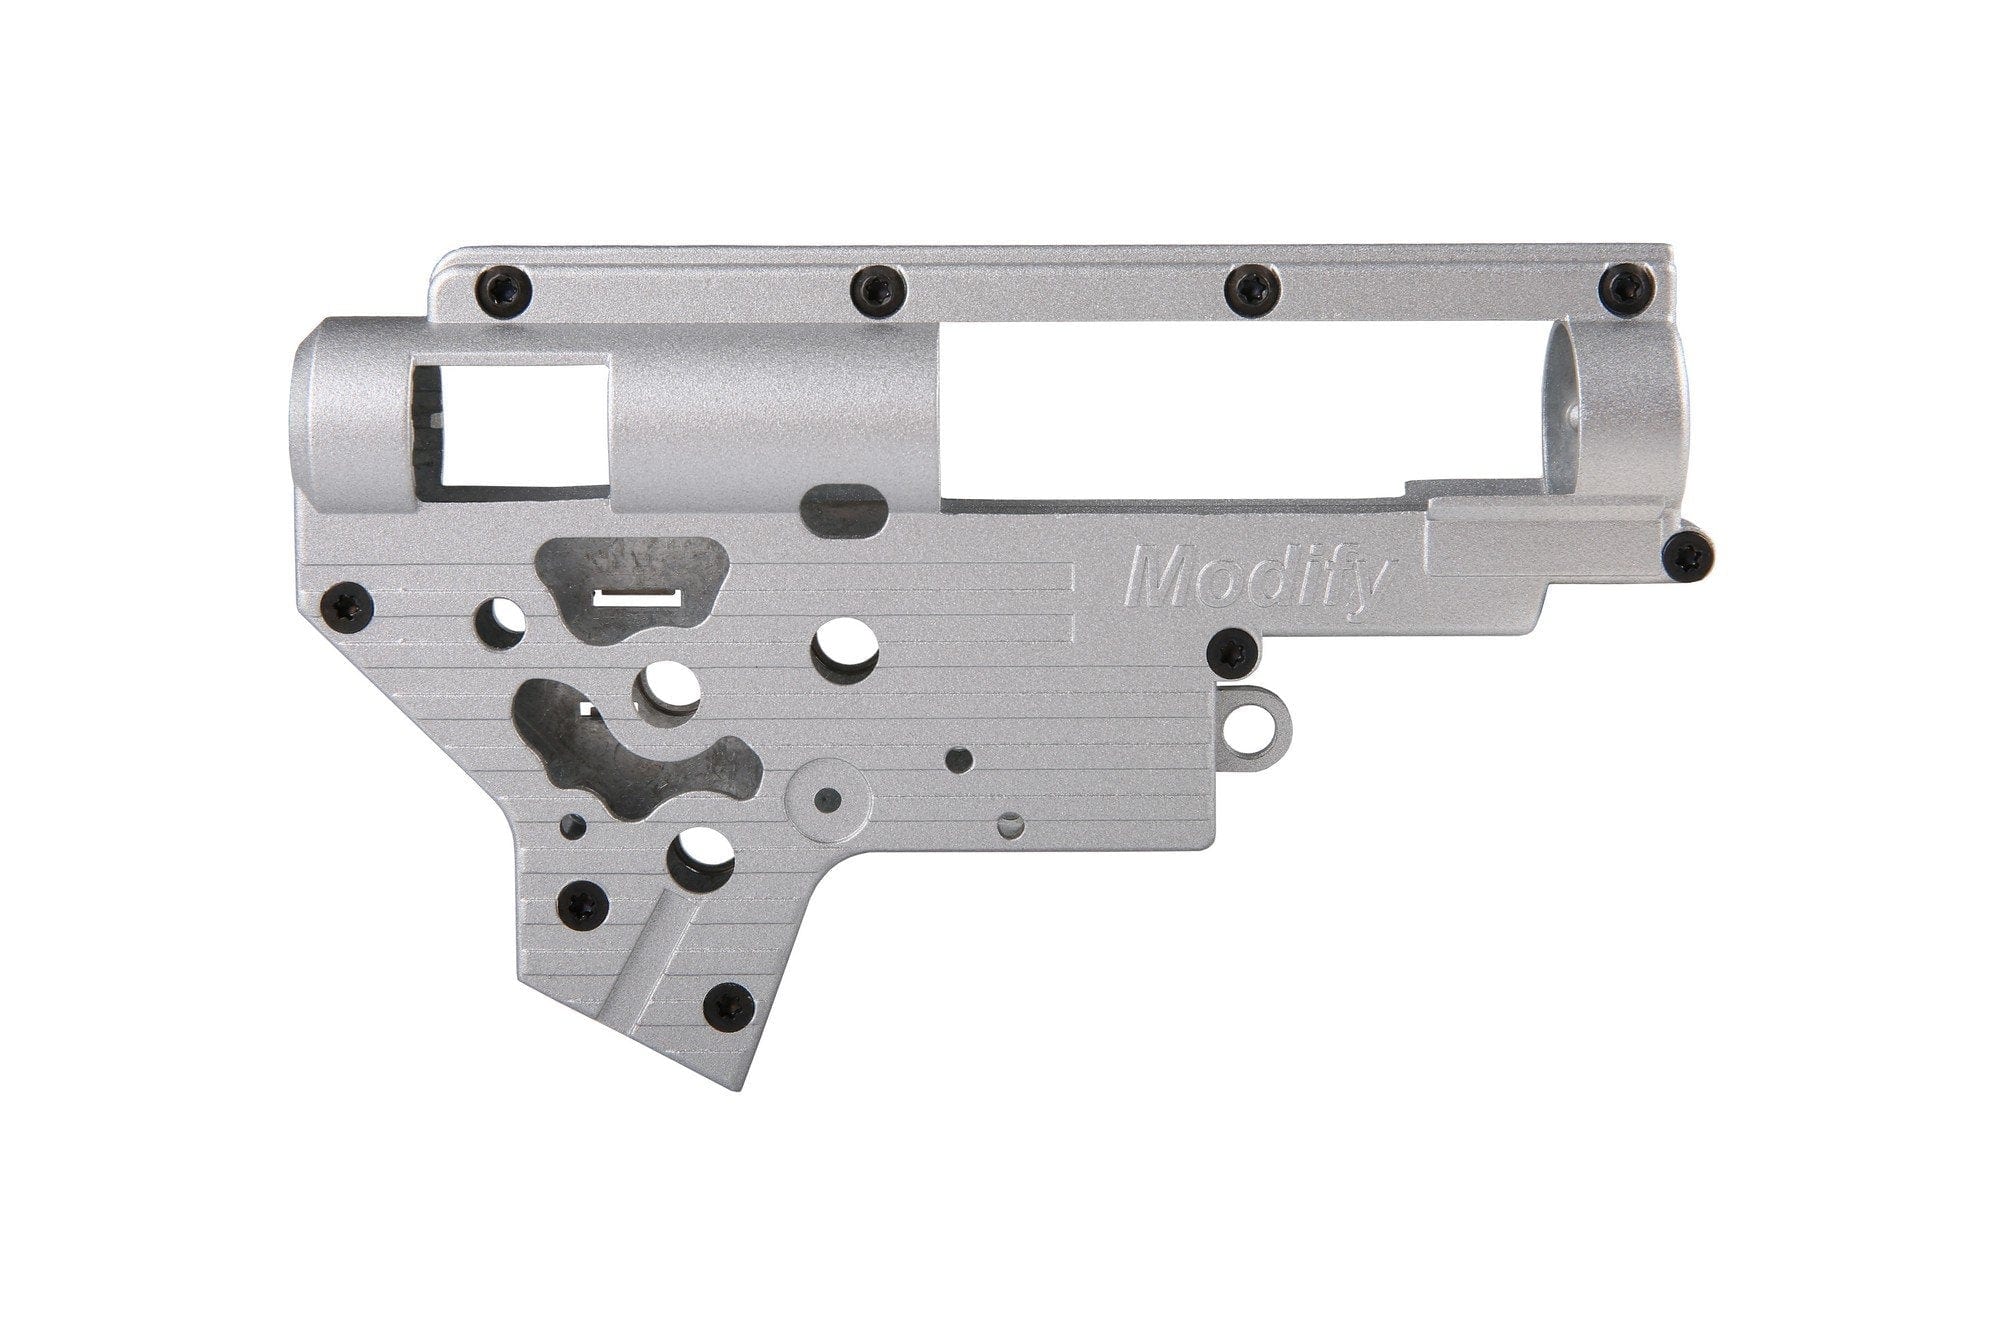 Torus V.2 Reinforced gearbox frame with 8mm sockets by Modify on Airsoft Mania Europe